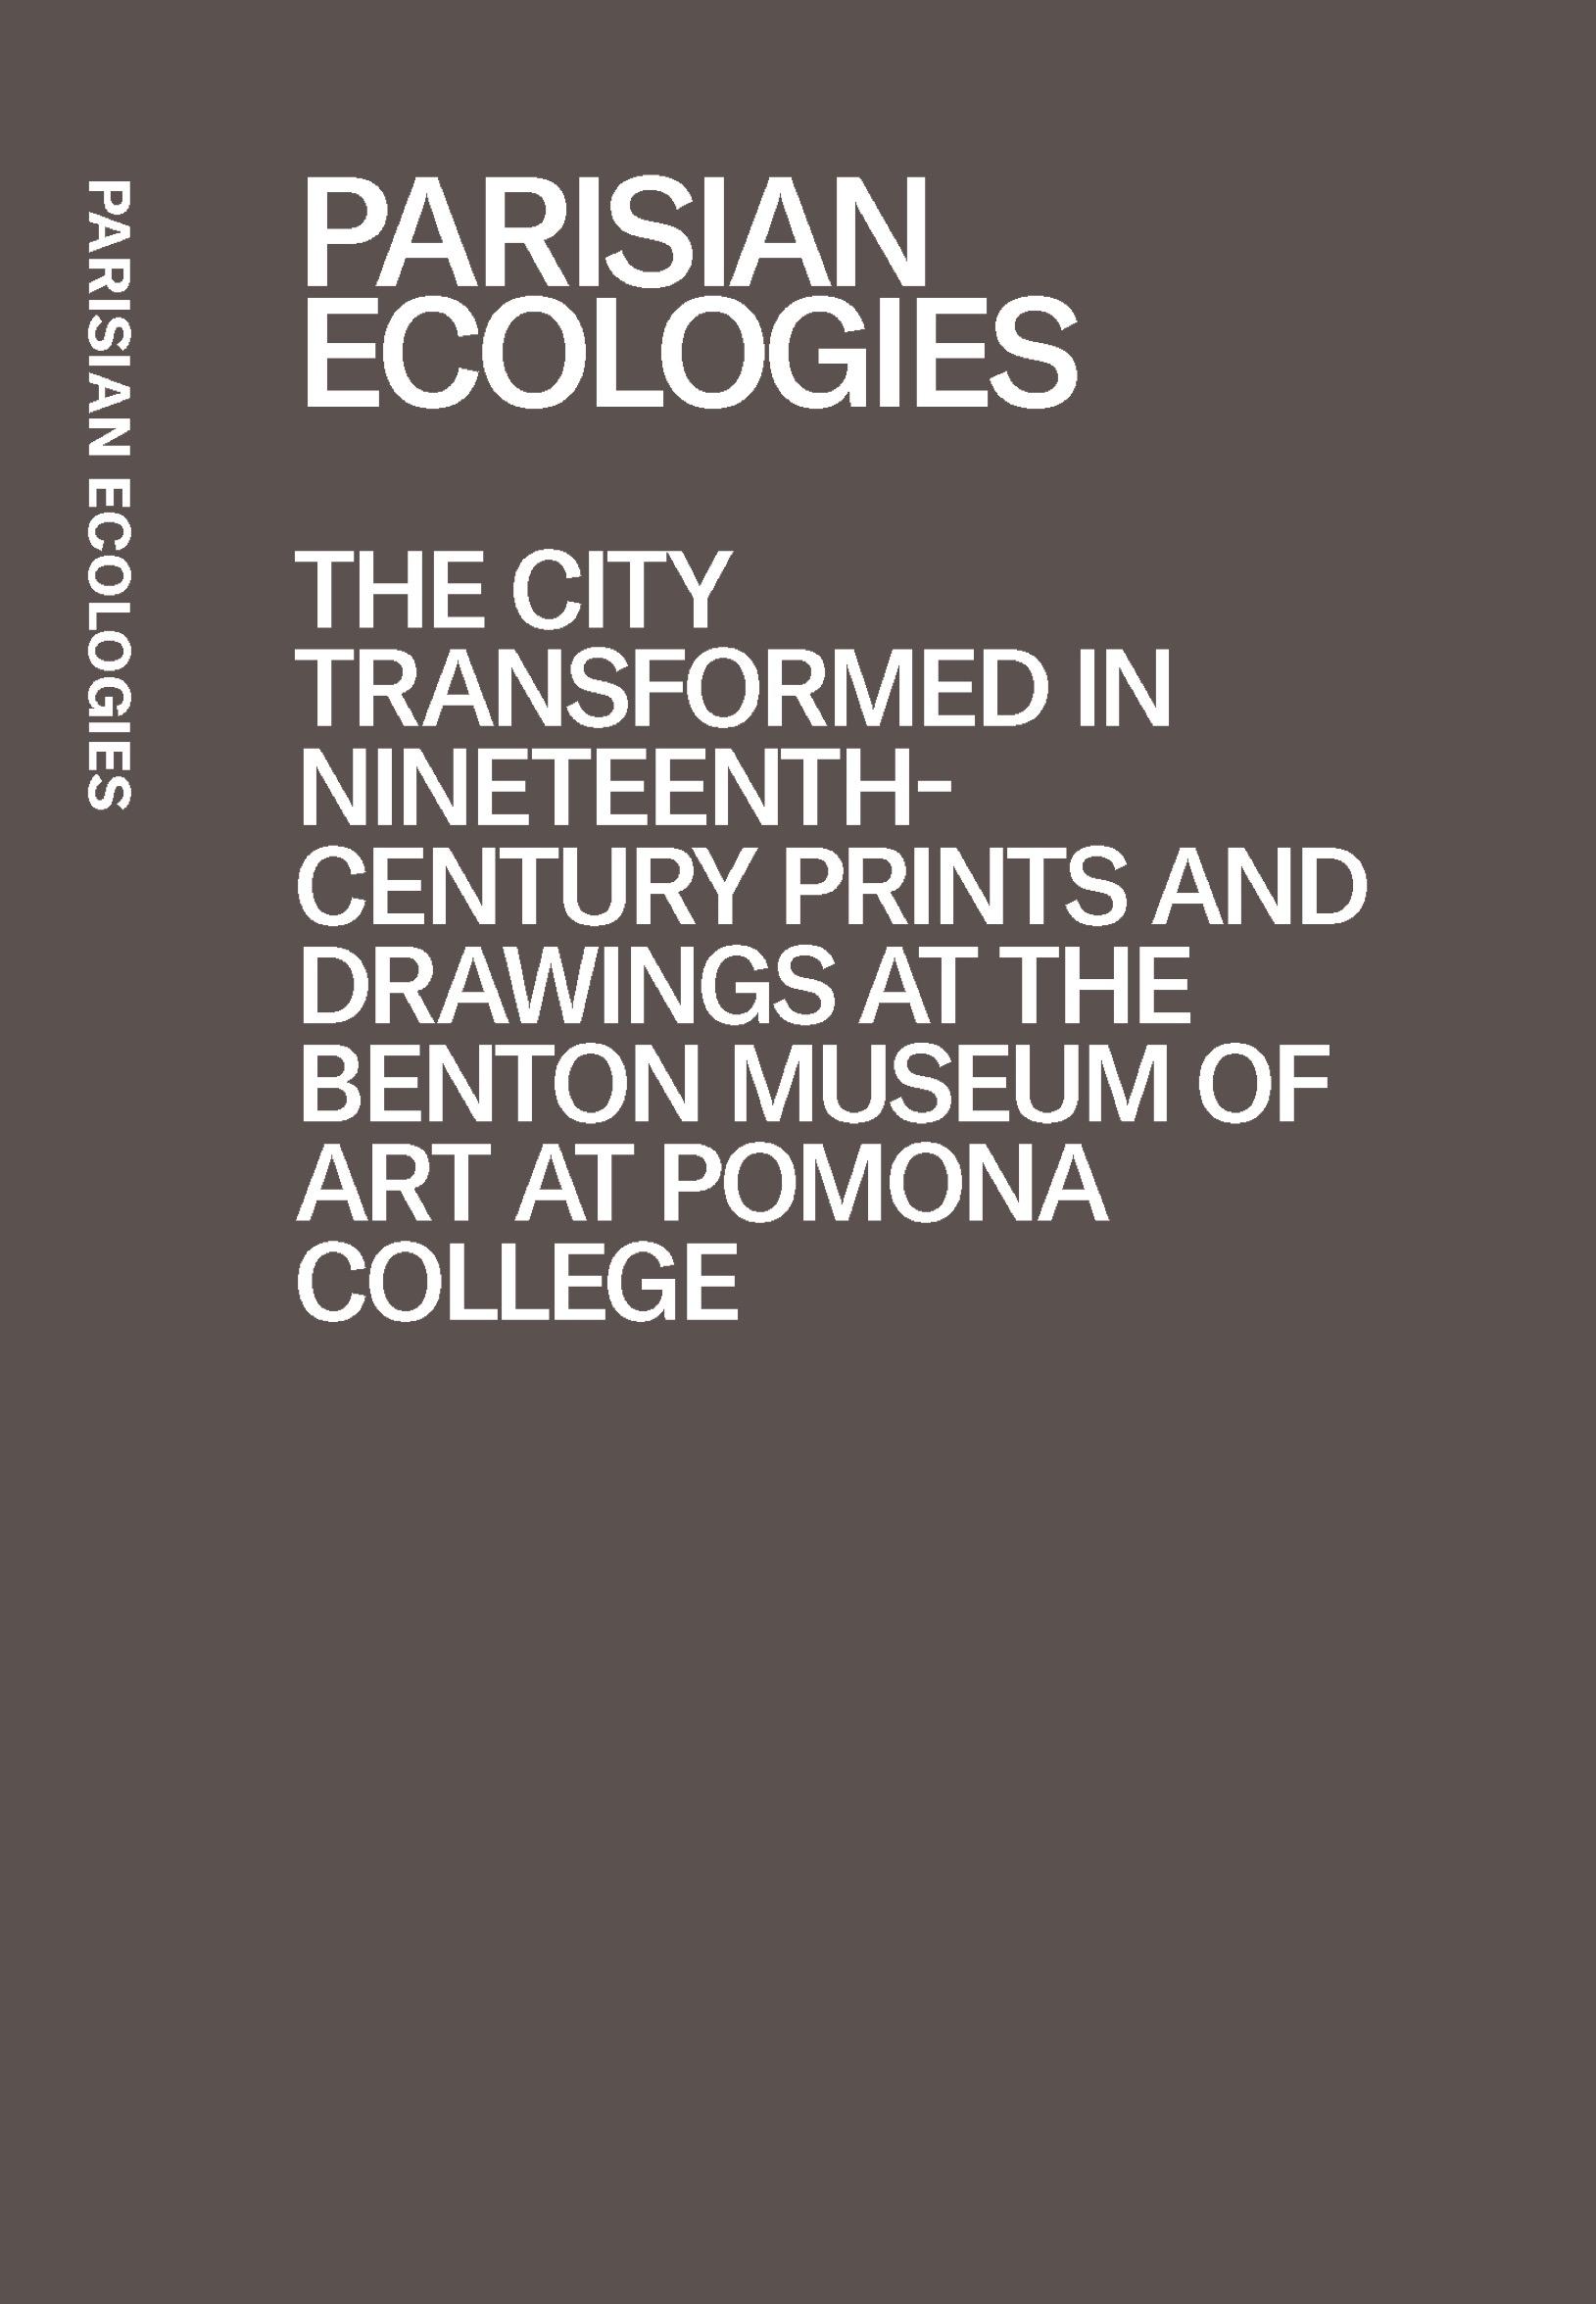 brown book cover with exhibition text in white